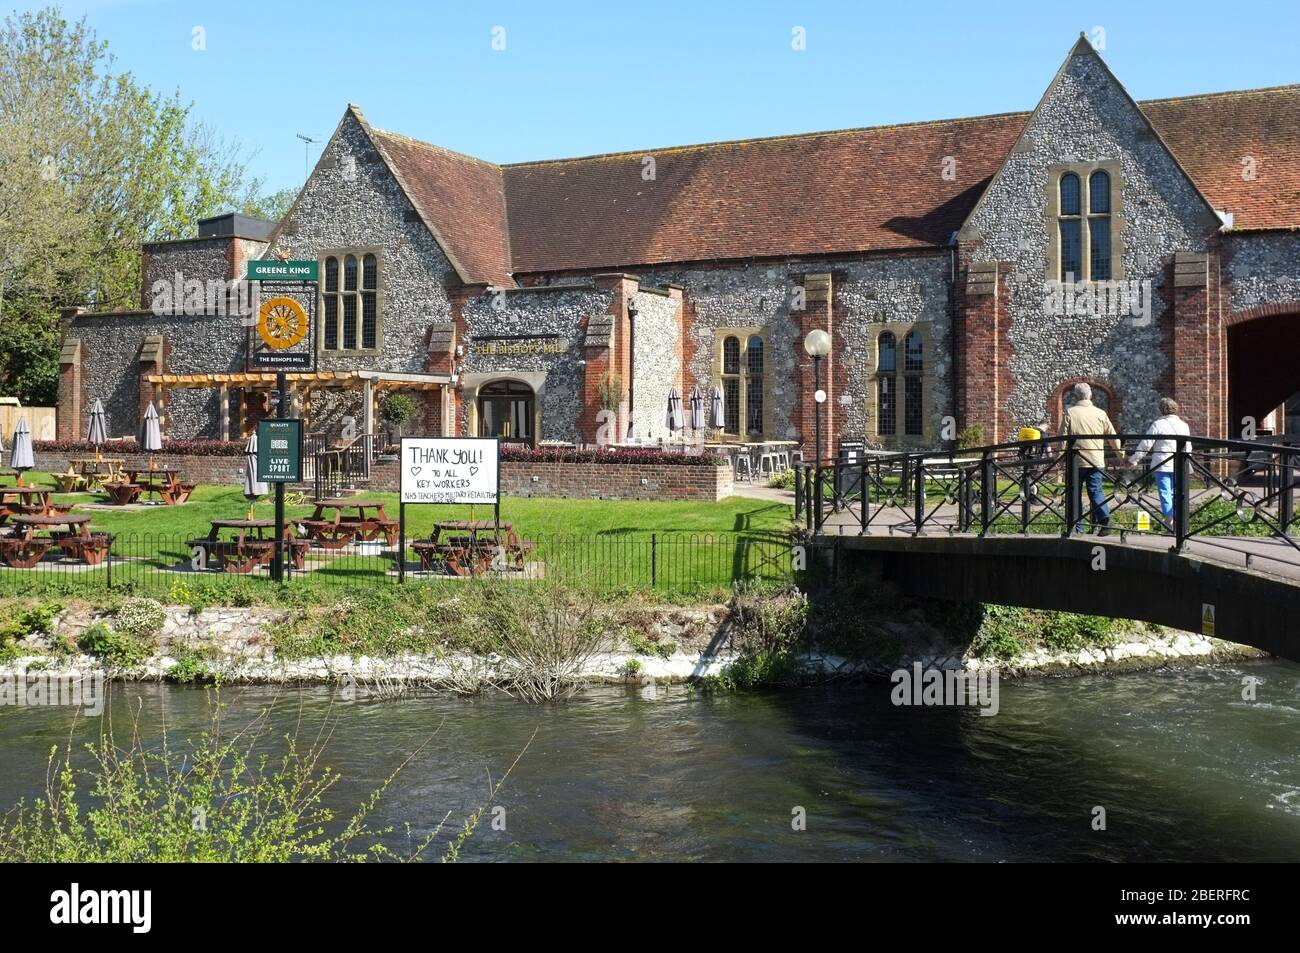 The Bishops Mill pub in Salisbury UK during the coronavirus emergency in April 2020. Note the sign praising key workers during the crisis. Stock Photo